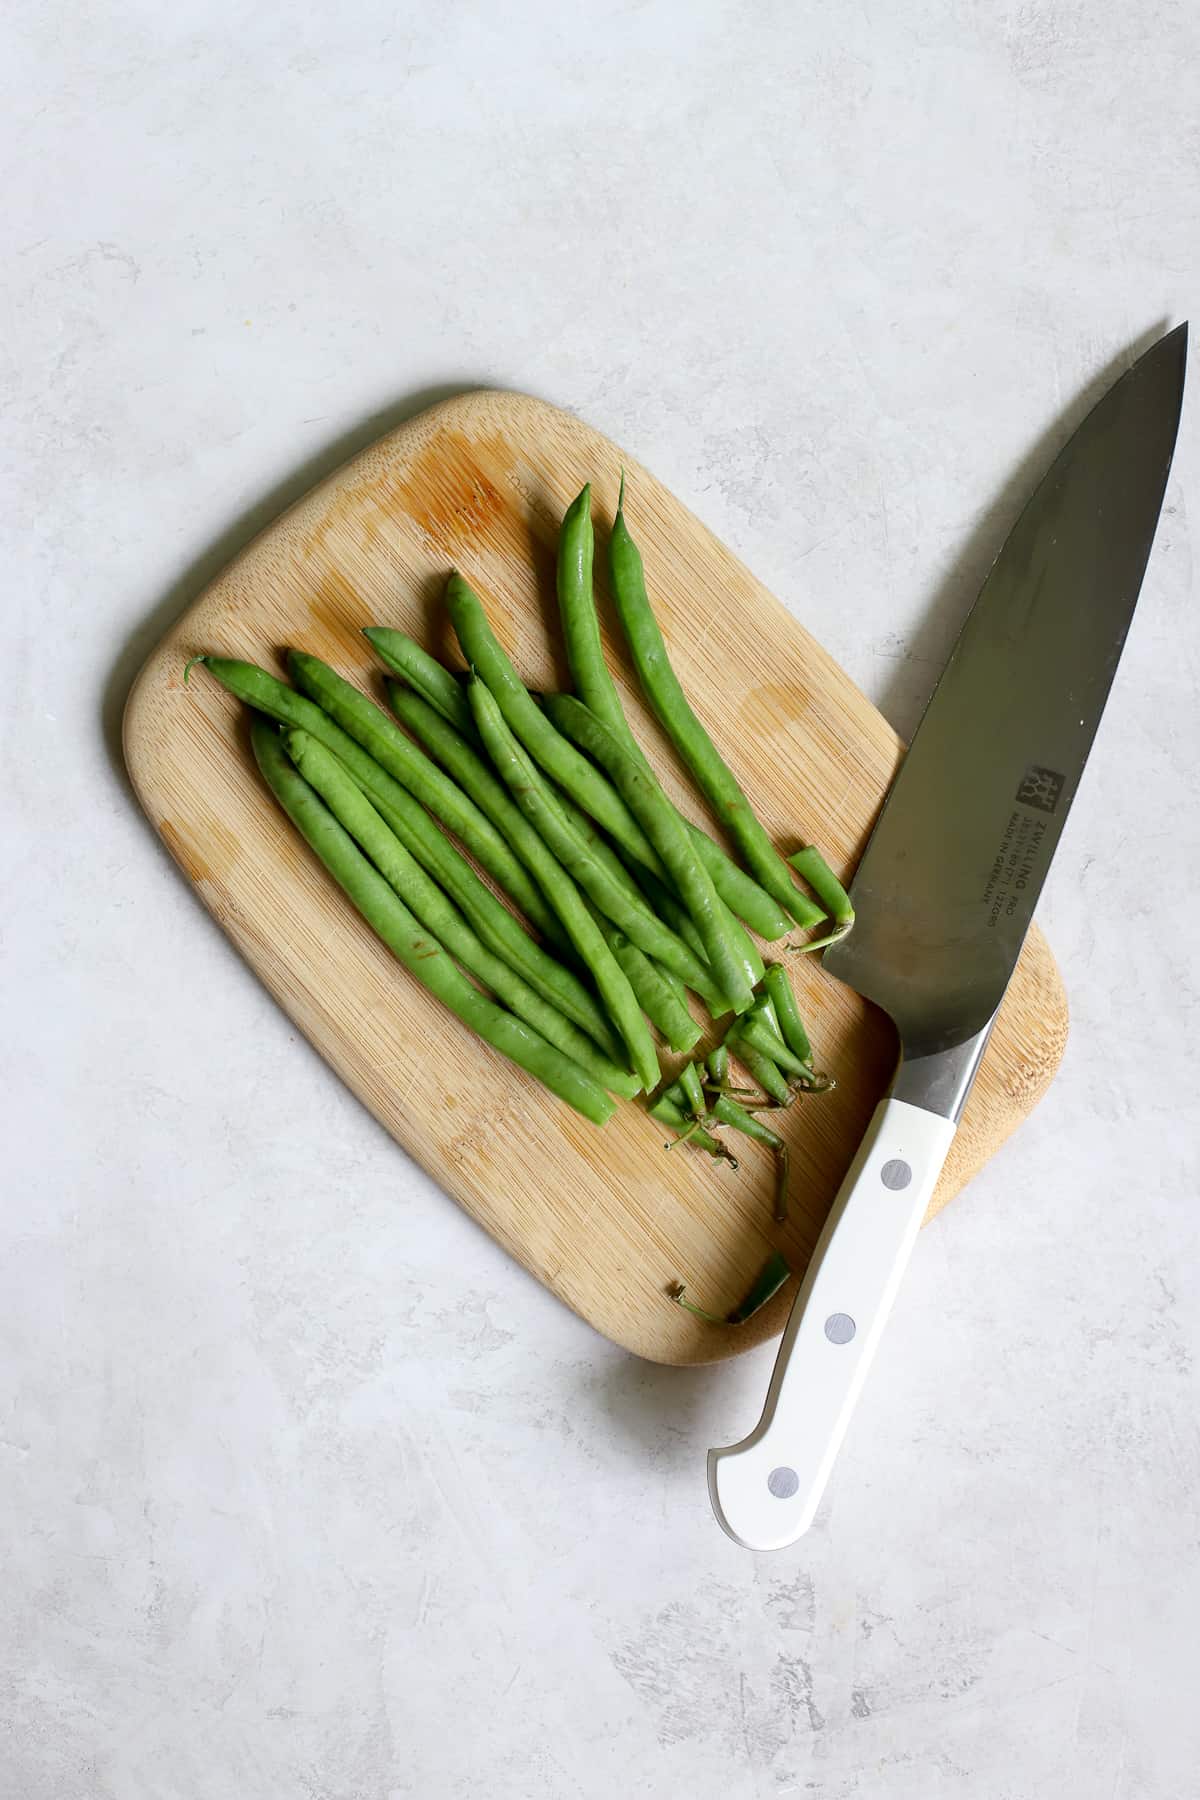 Green beans being trimmed on small wooden cutting board with chef's knife, on gray and white surface